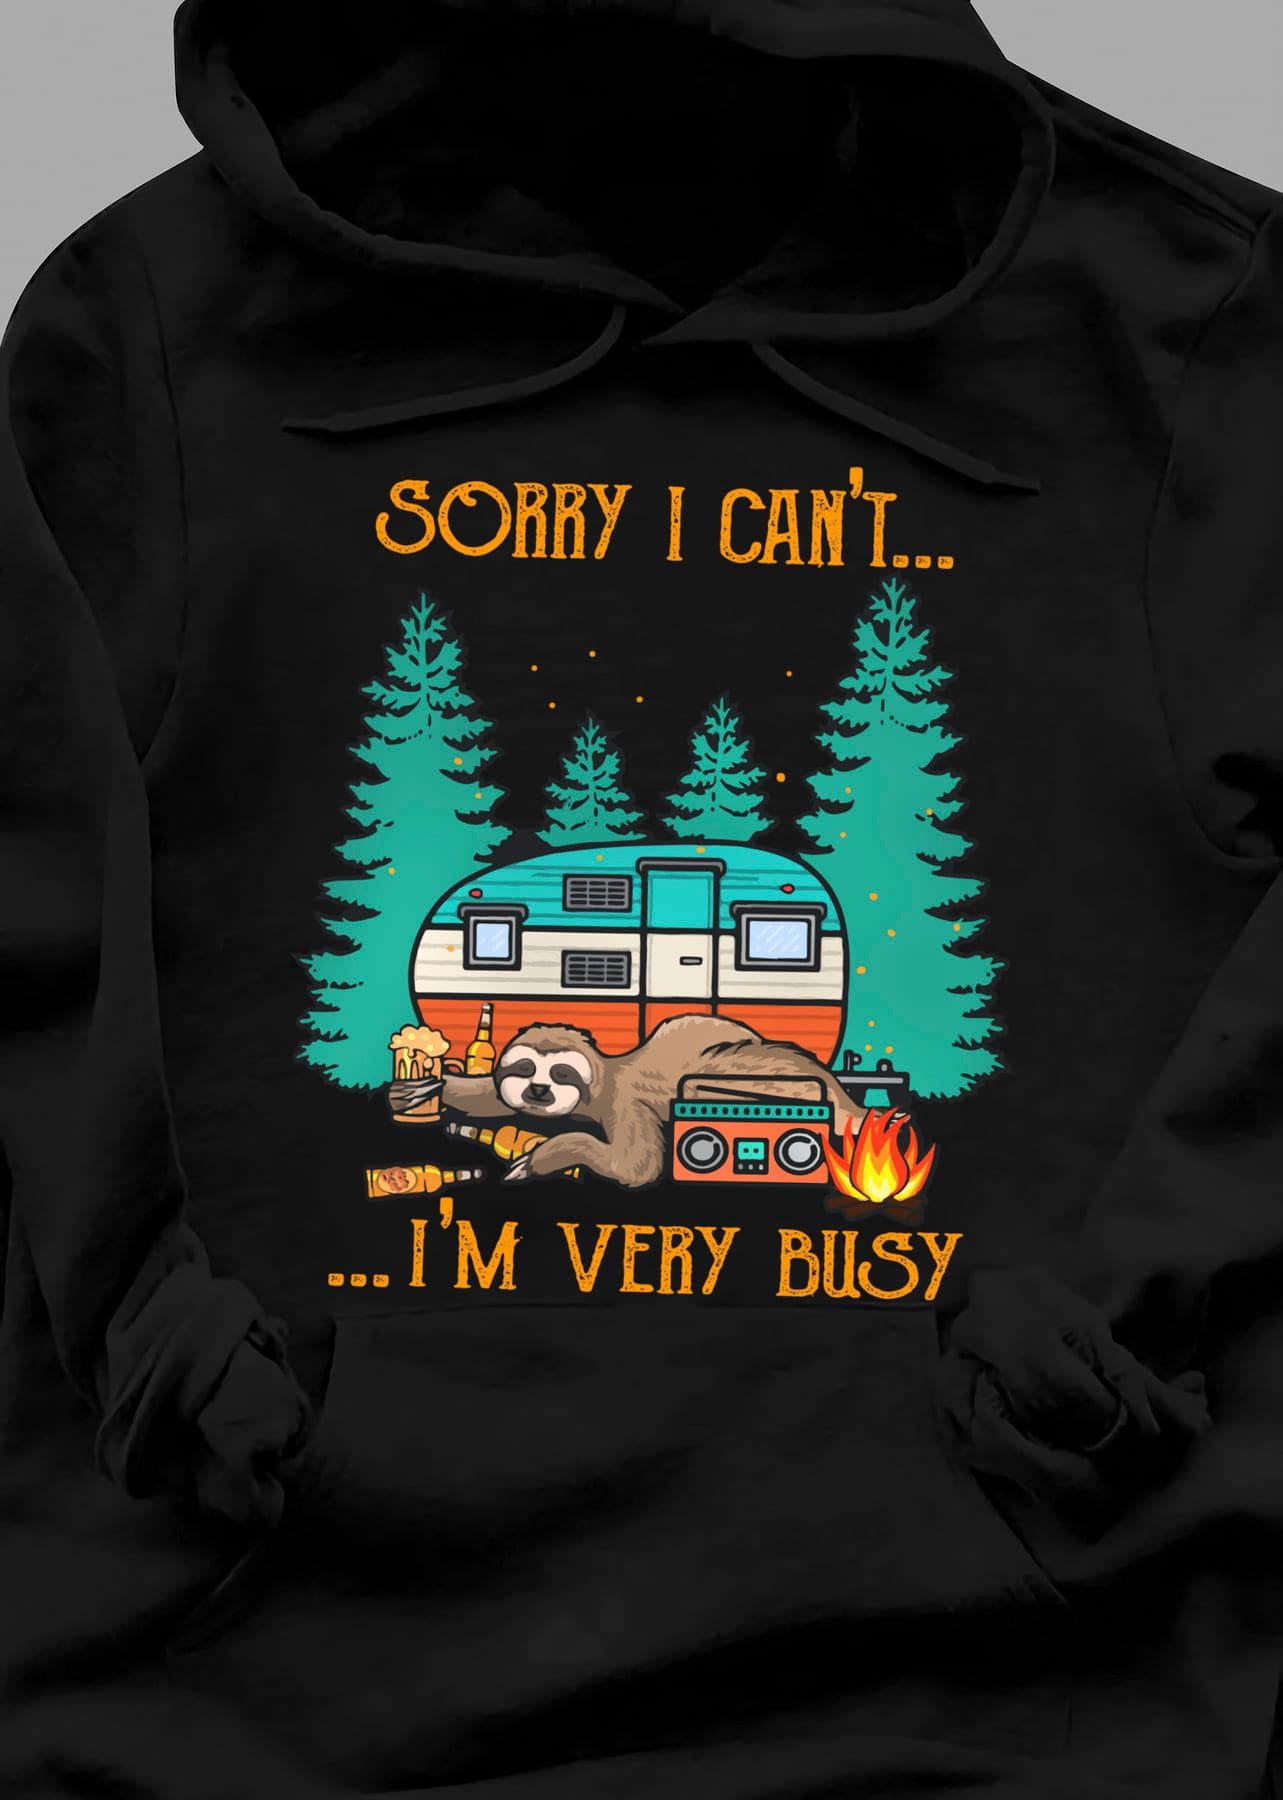 Sorry I can't I'm very busy - Sloth drinking beer, camping and drinking, drunk sloth T-shirt